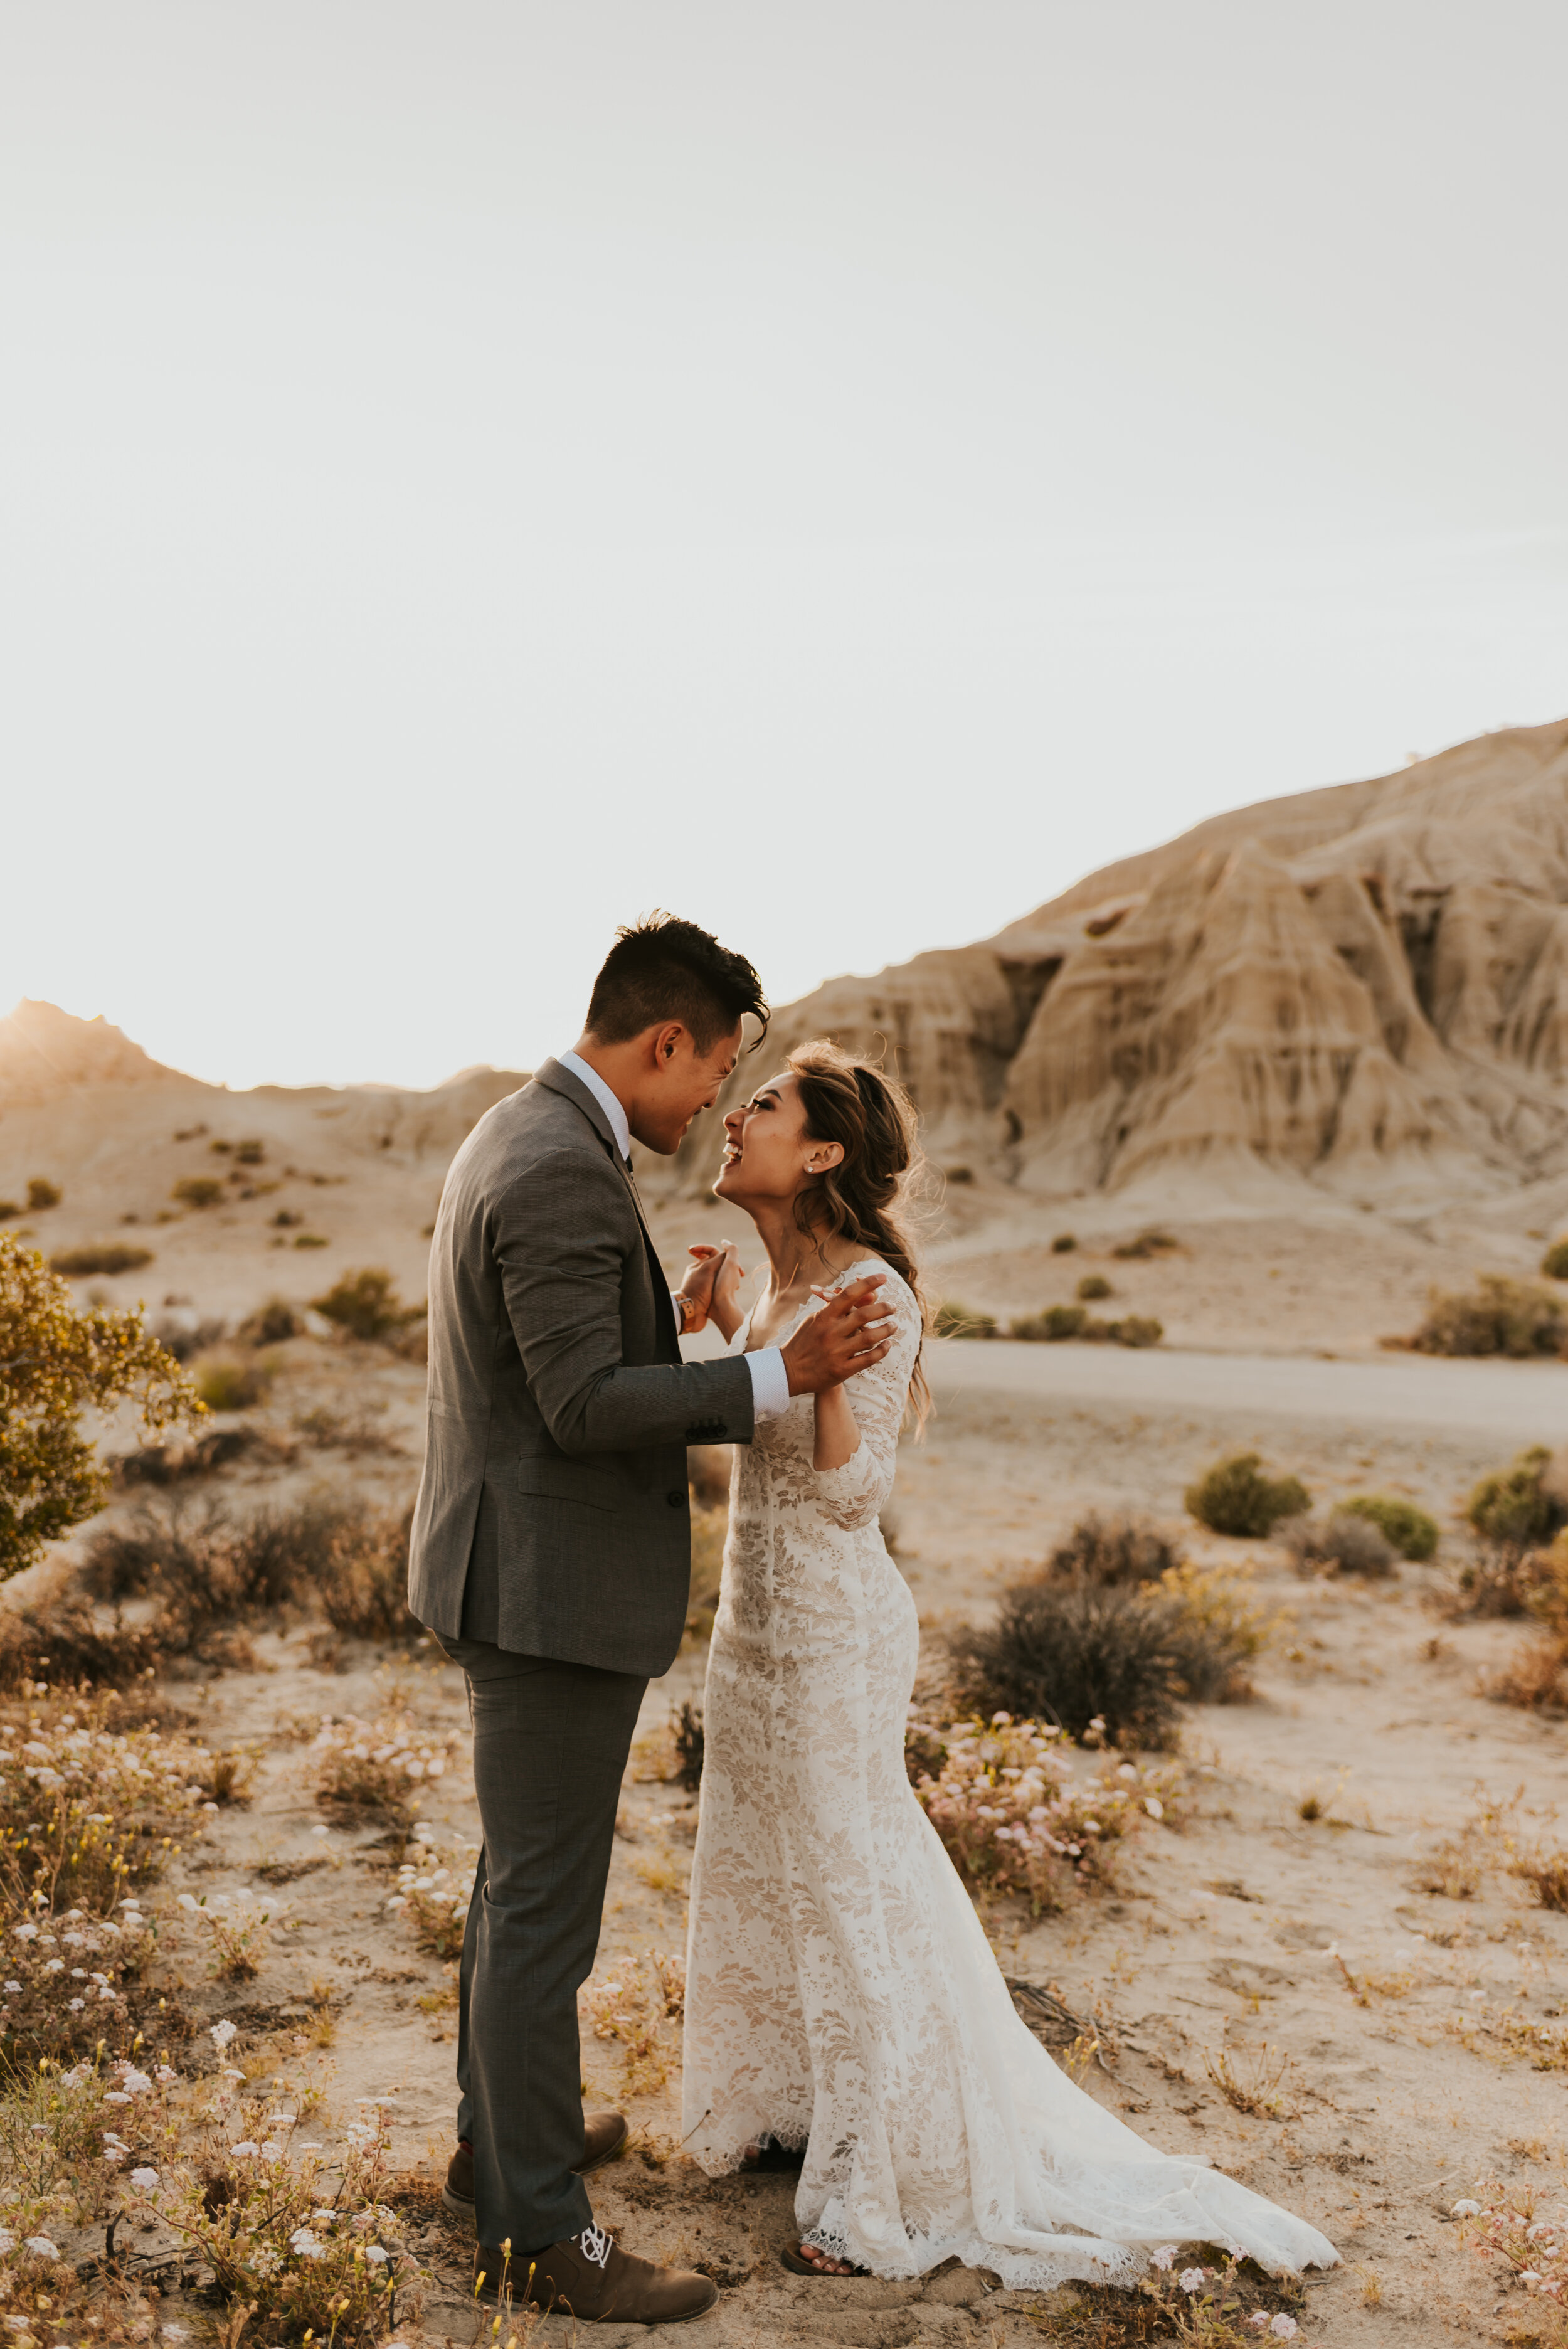 Red Rock Canyon Elopement | Southern California Elopement Photographer | Destination Elopement | Desert Elopement | Places to Elope | #elopement